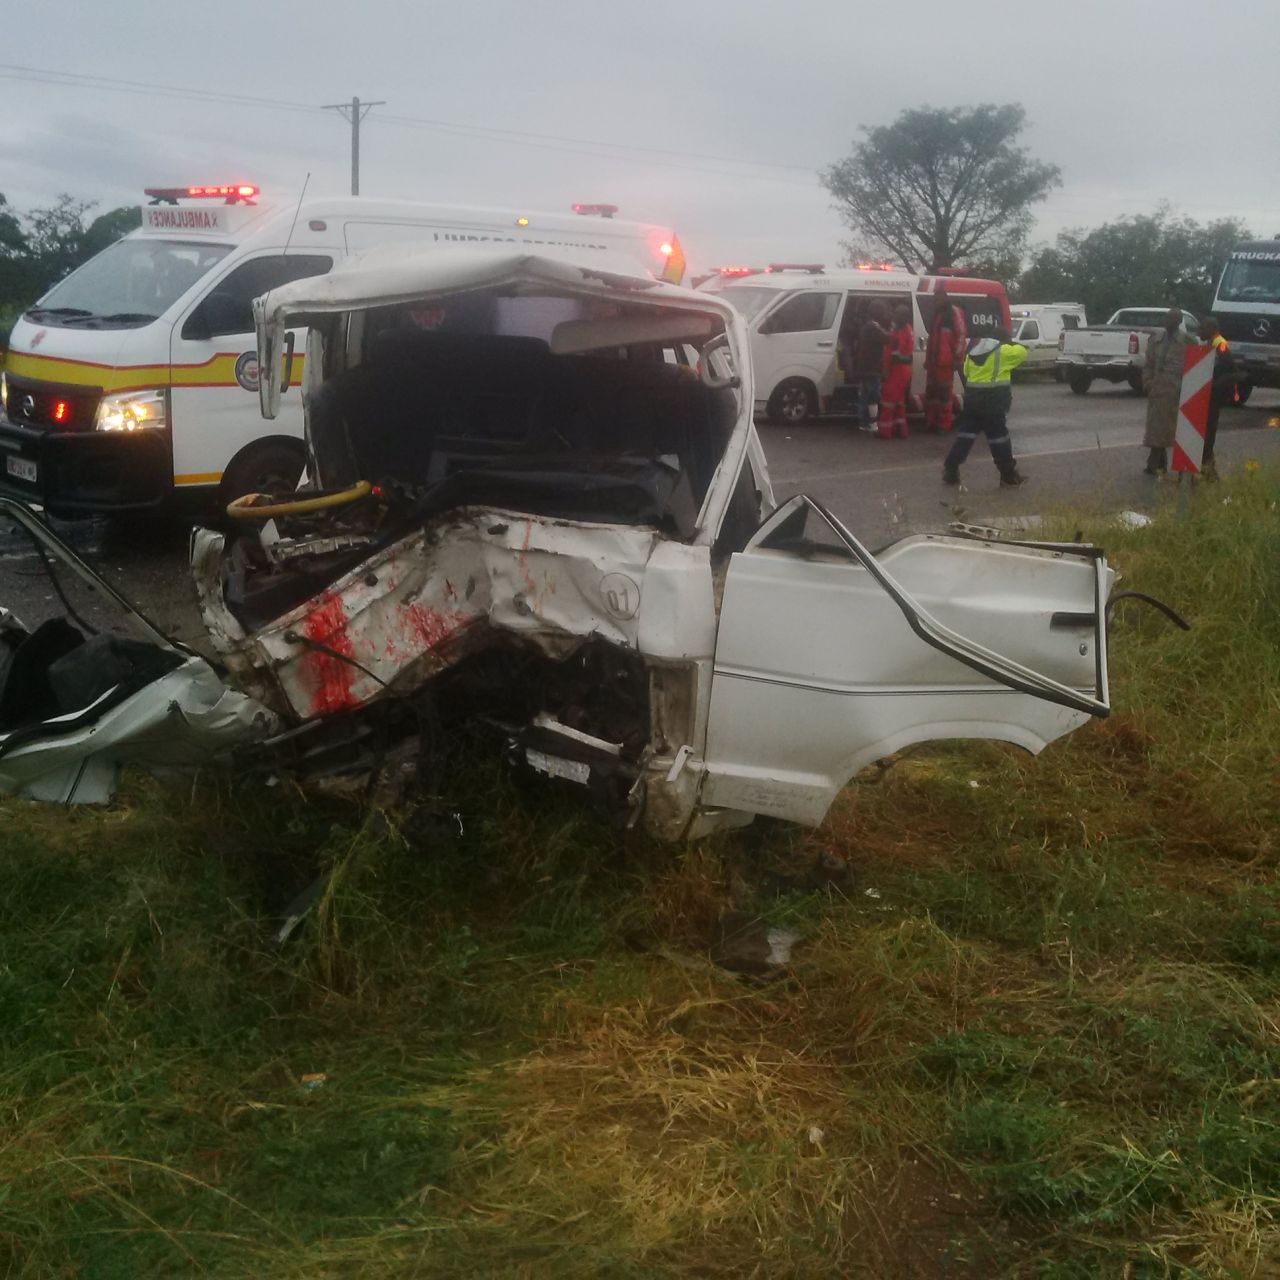 Two taxis collide injuring 16, Musina